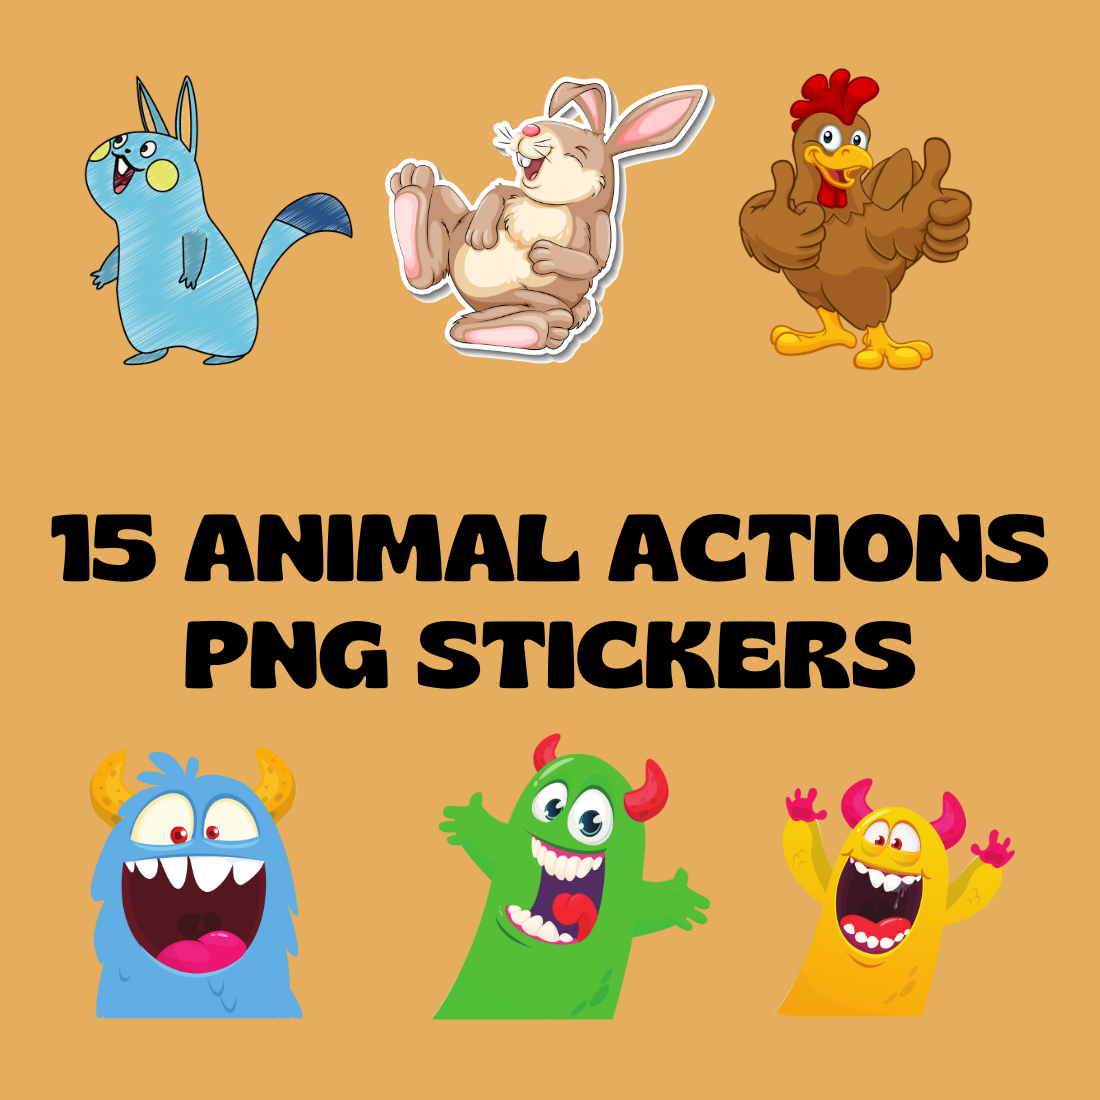 Funny Animal Actions PNG Graphic Stickers cover image.